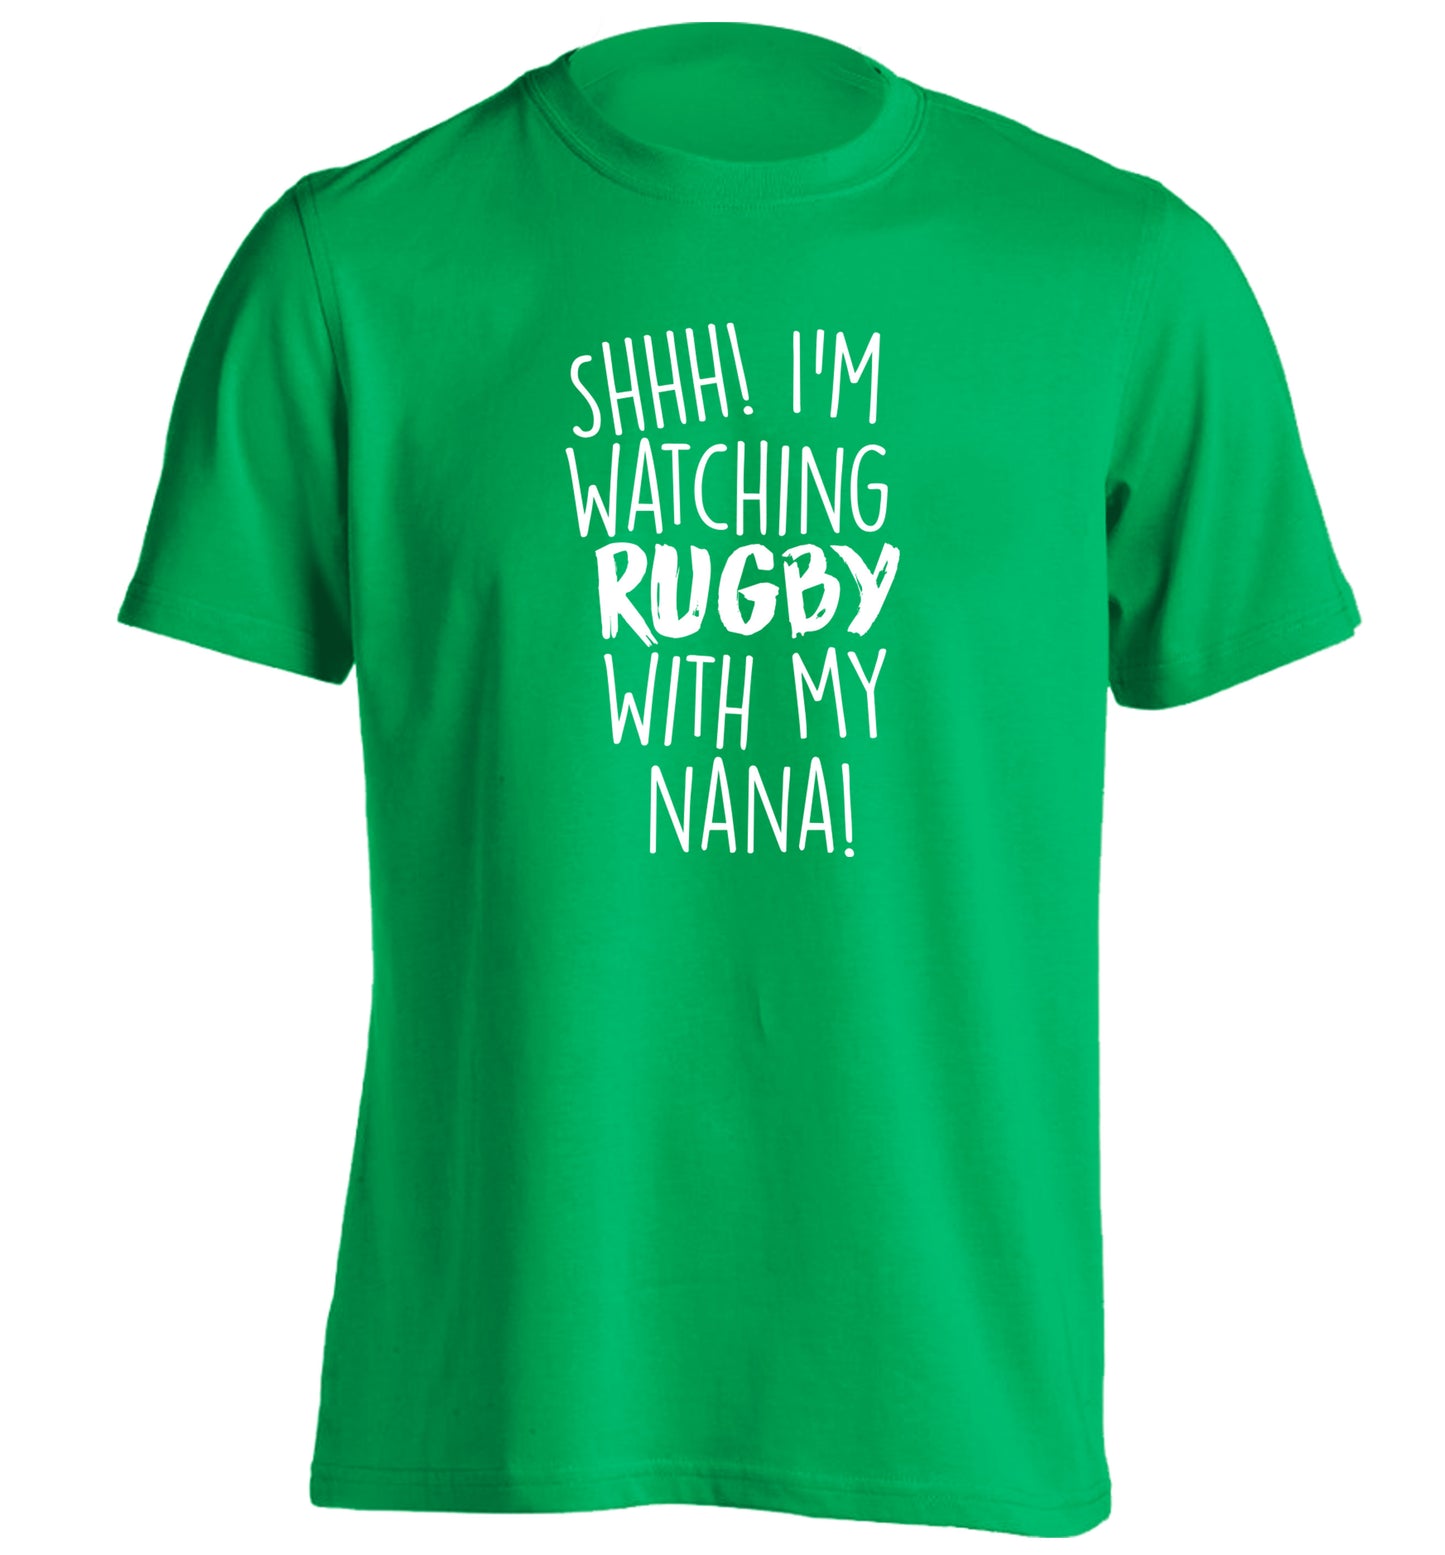 Shh I'm watching rugby with my nana adults unisex green Tshirt 2XL